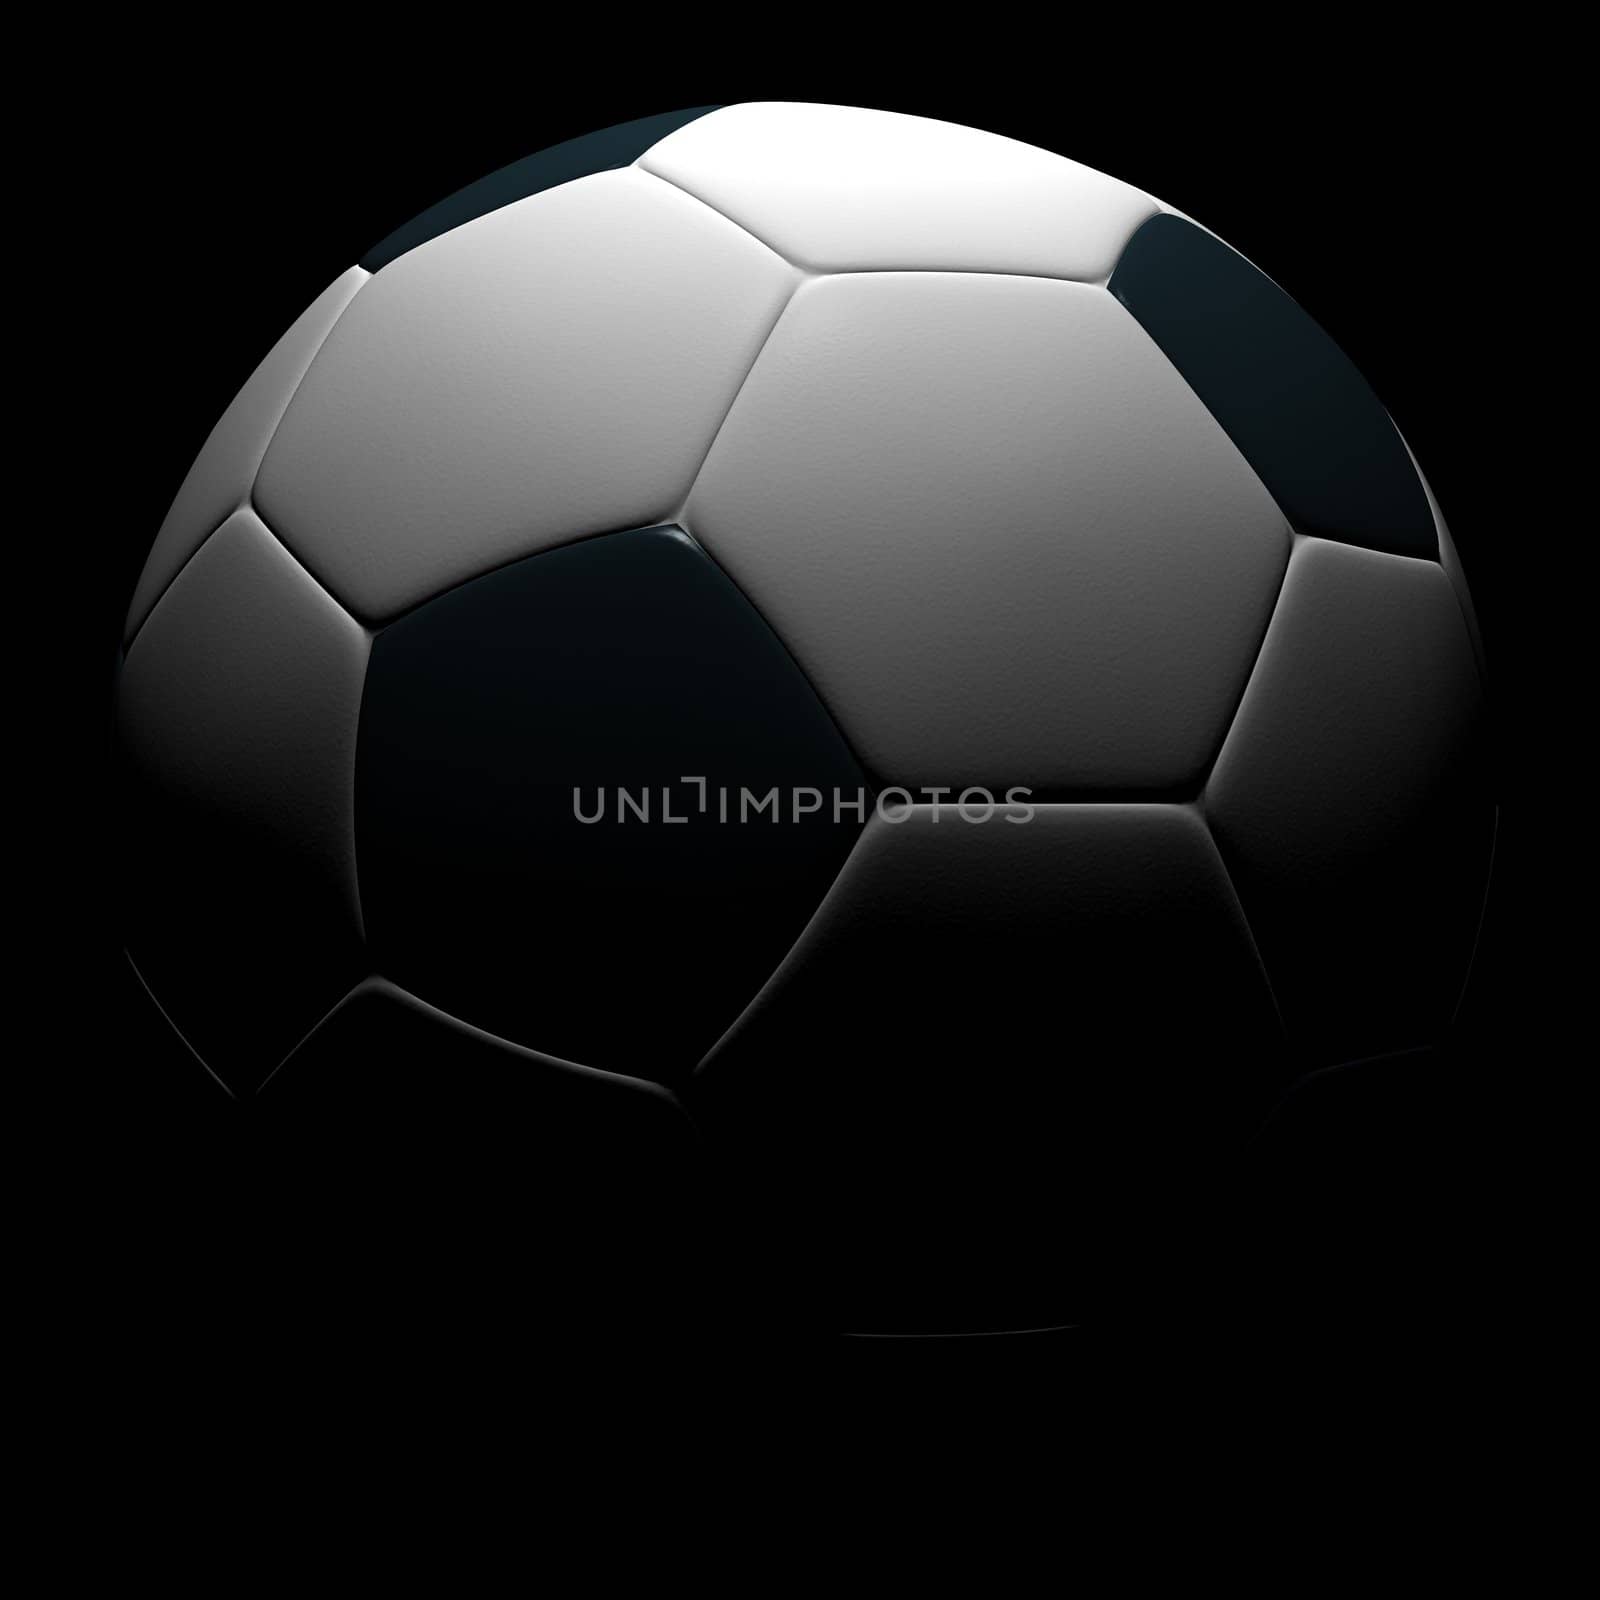 Soccer ball isolated on black background. Photorealistic 3D rendering.